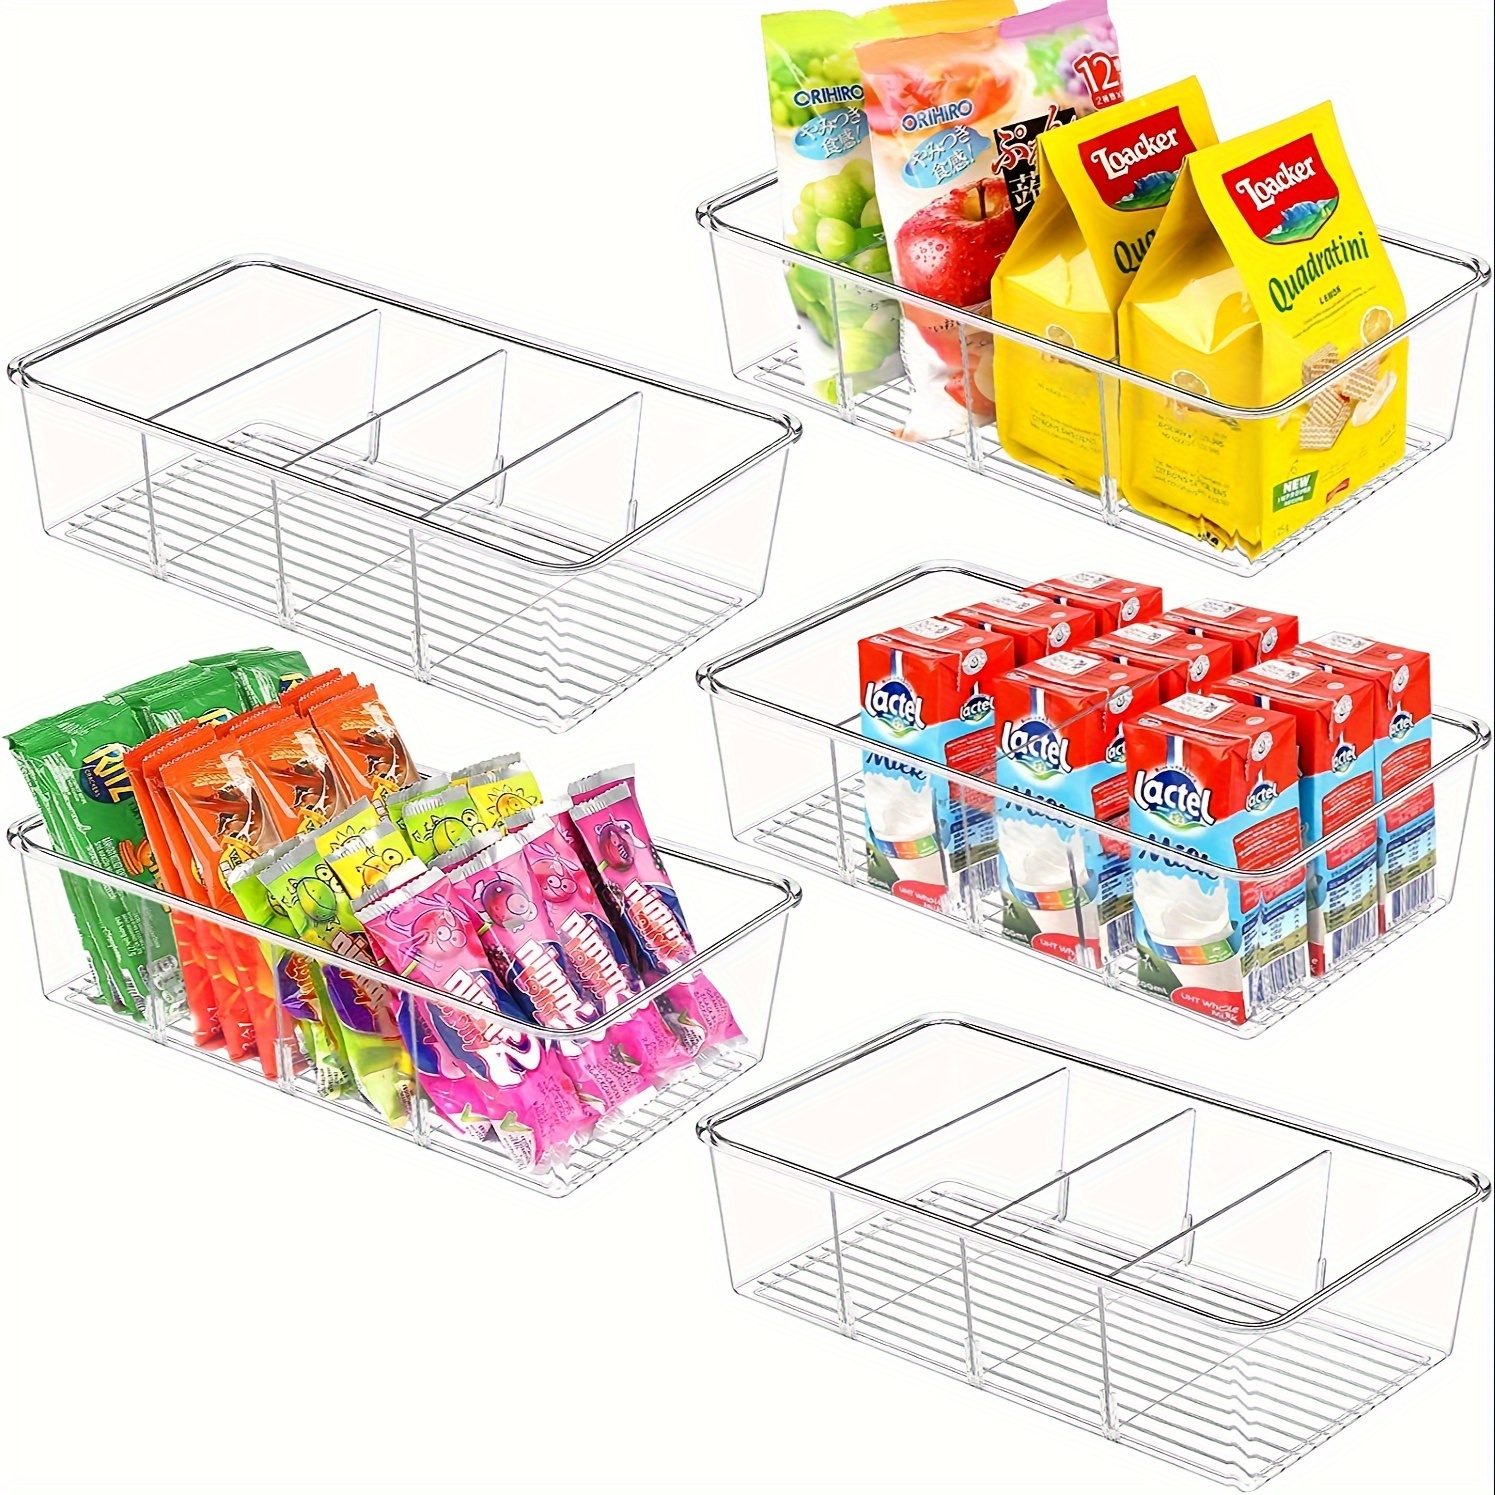 8ct mDesign Plastic Stacking Closet Storage Organizer Bin with Drawer, 8 Pack, Clear